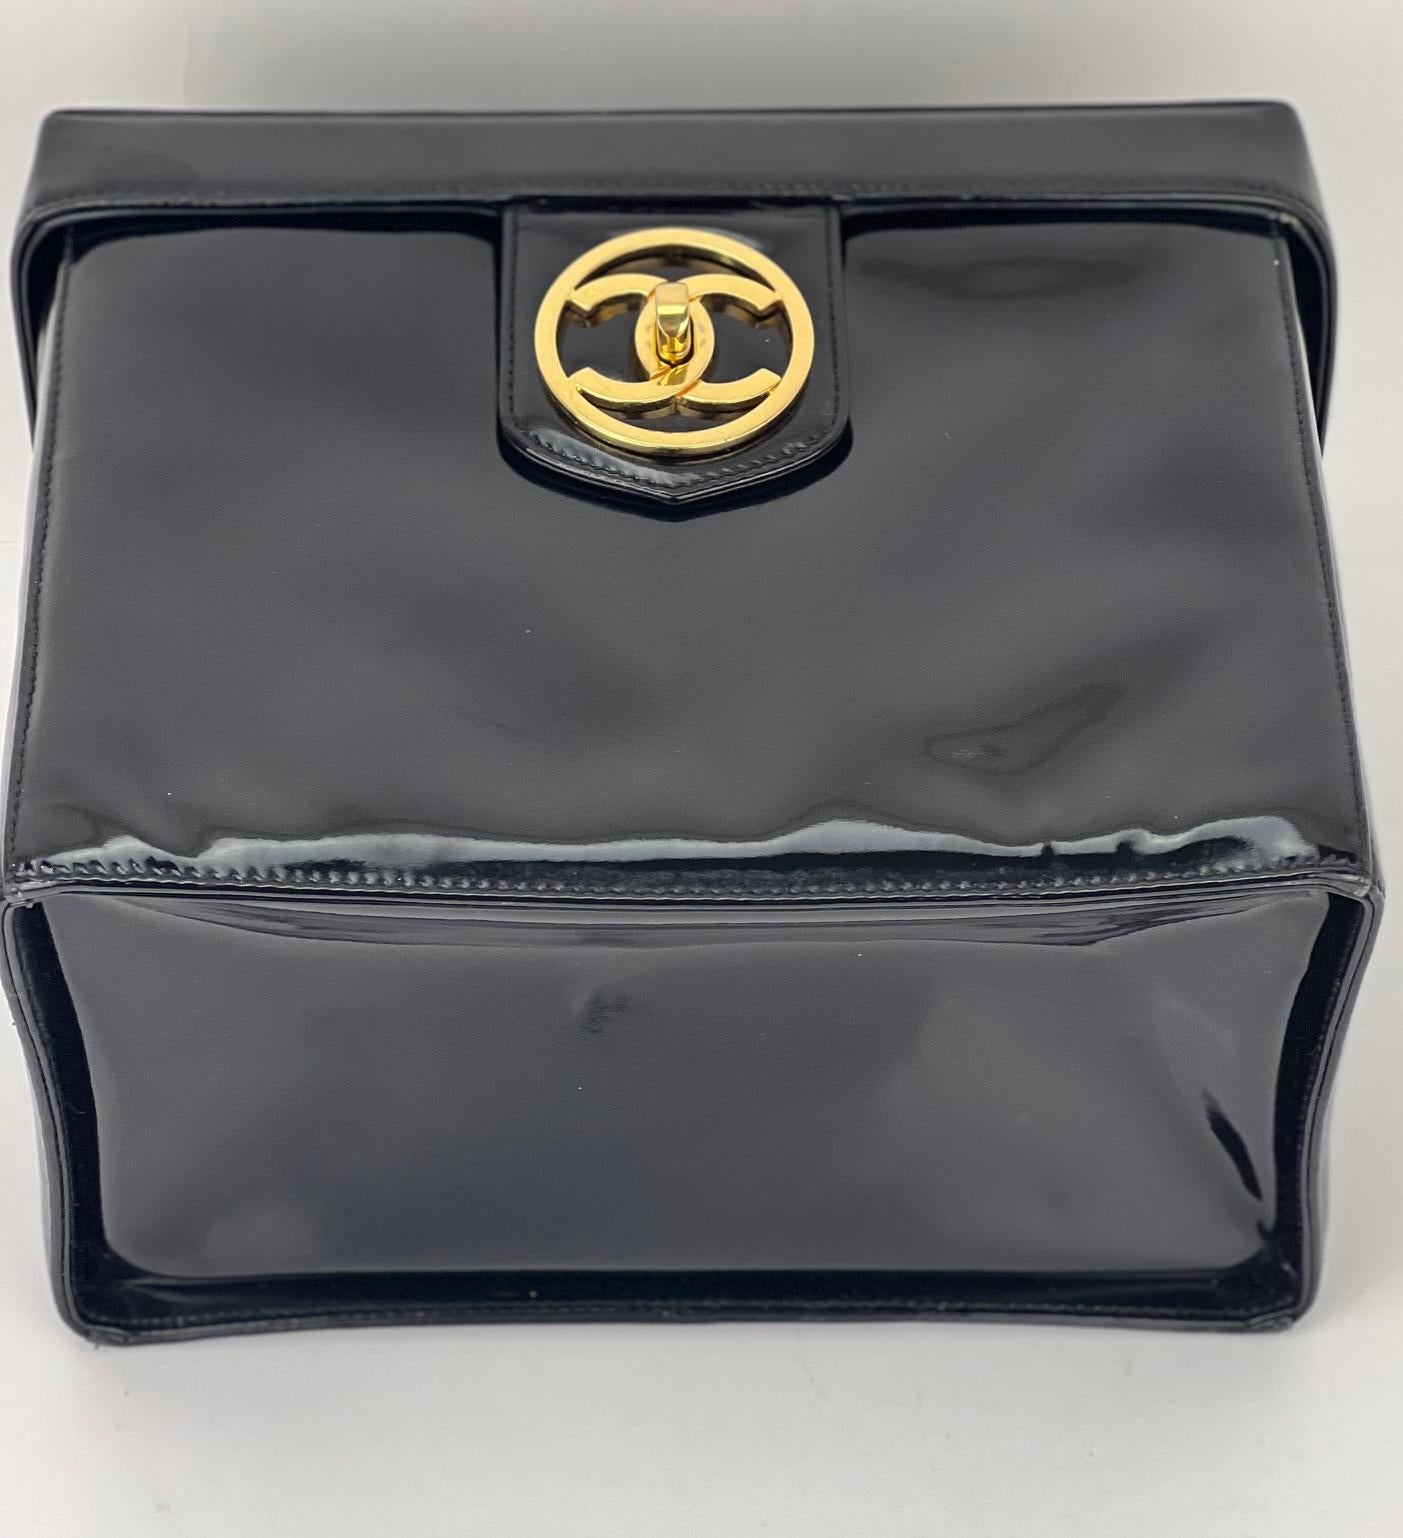 Pre-Owned  100% Authentic
CHANEL Timeless CC Vanity Pouch
Added Chain to use as a Shoulder Bag
RATING: B...Very Good, well maintained,
shows minor signs of wear
MATERIAL: patent leather
STRAP: non Chanel removable golden strap 47'' 
DROP: 22.5 in